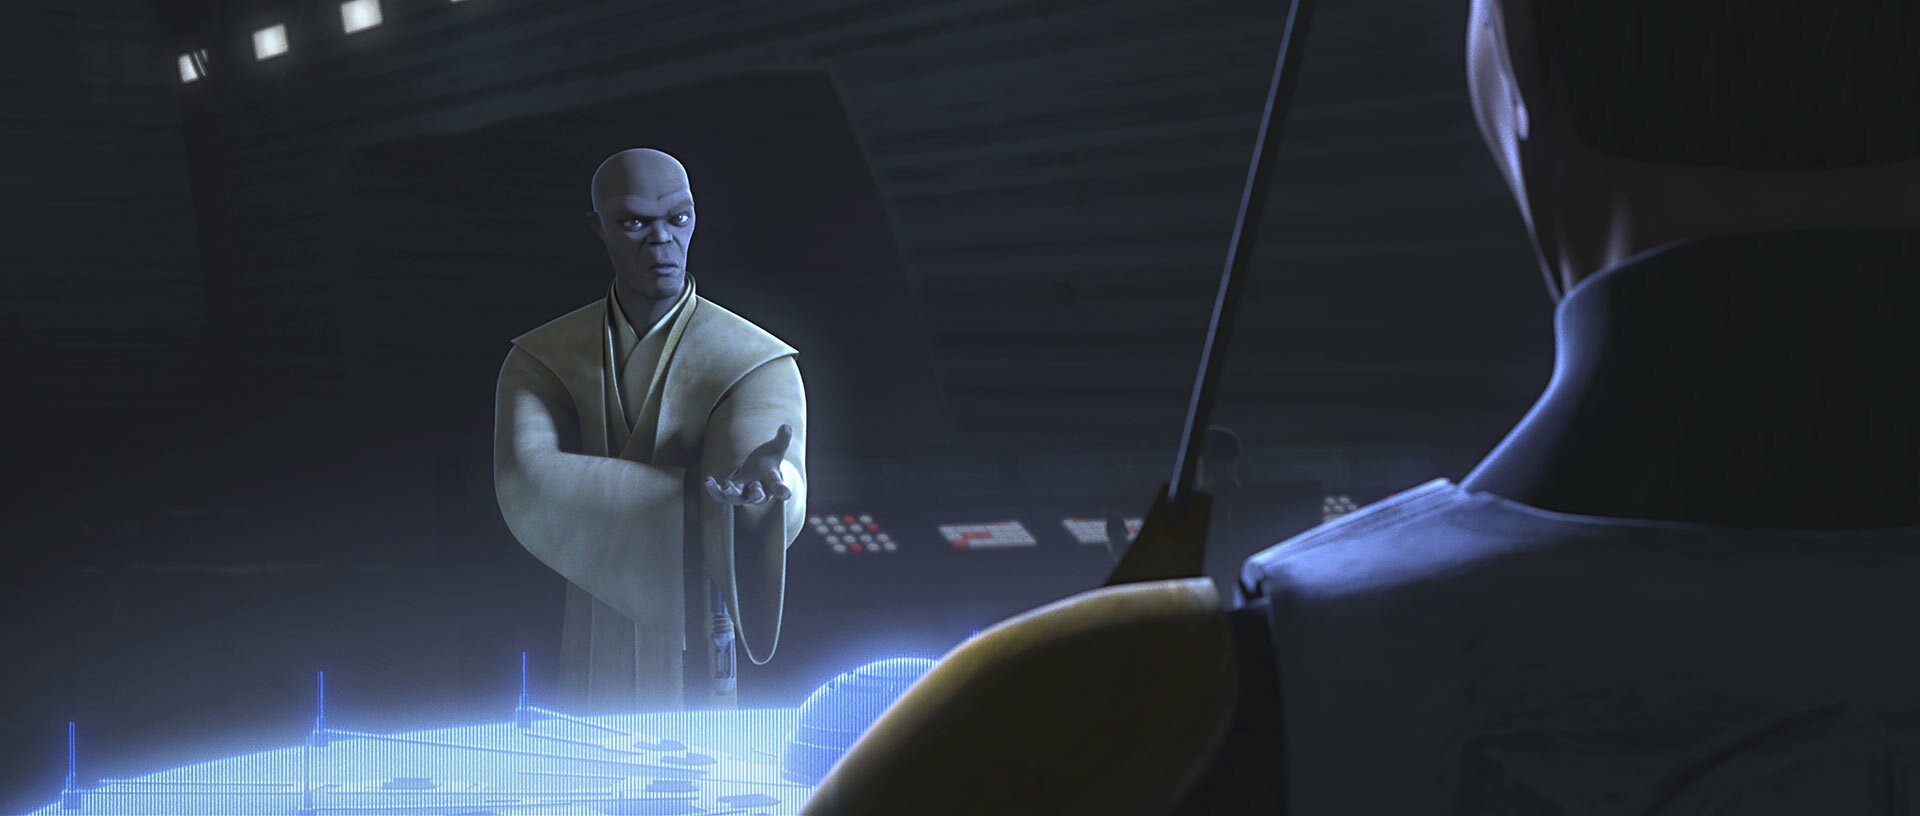 Windu dispatches Rex and Cody to take a small squad of troopers and infiltrate the Separatist cyb...